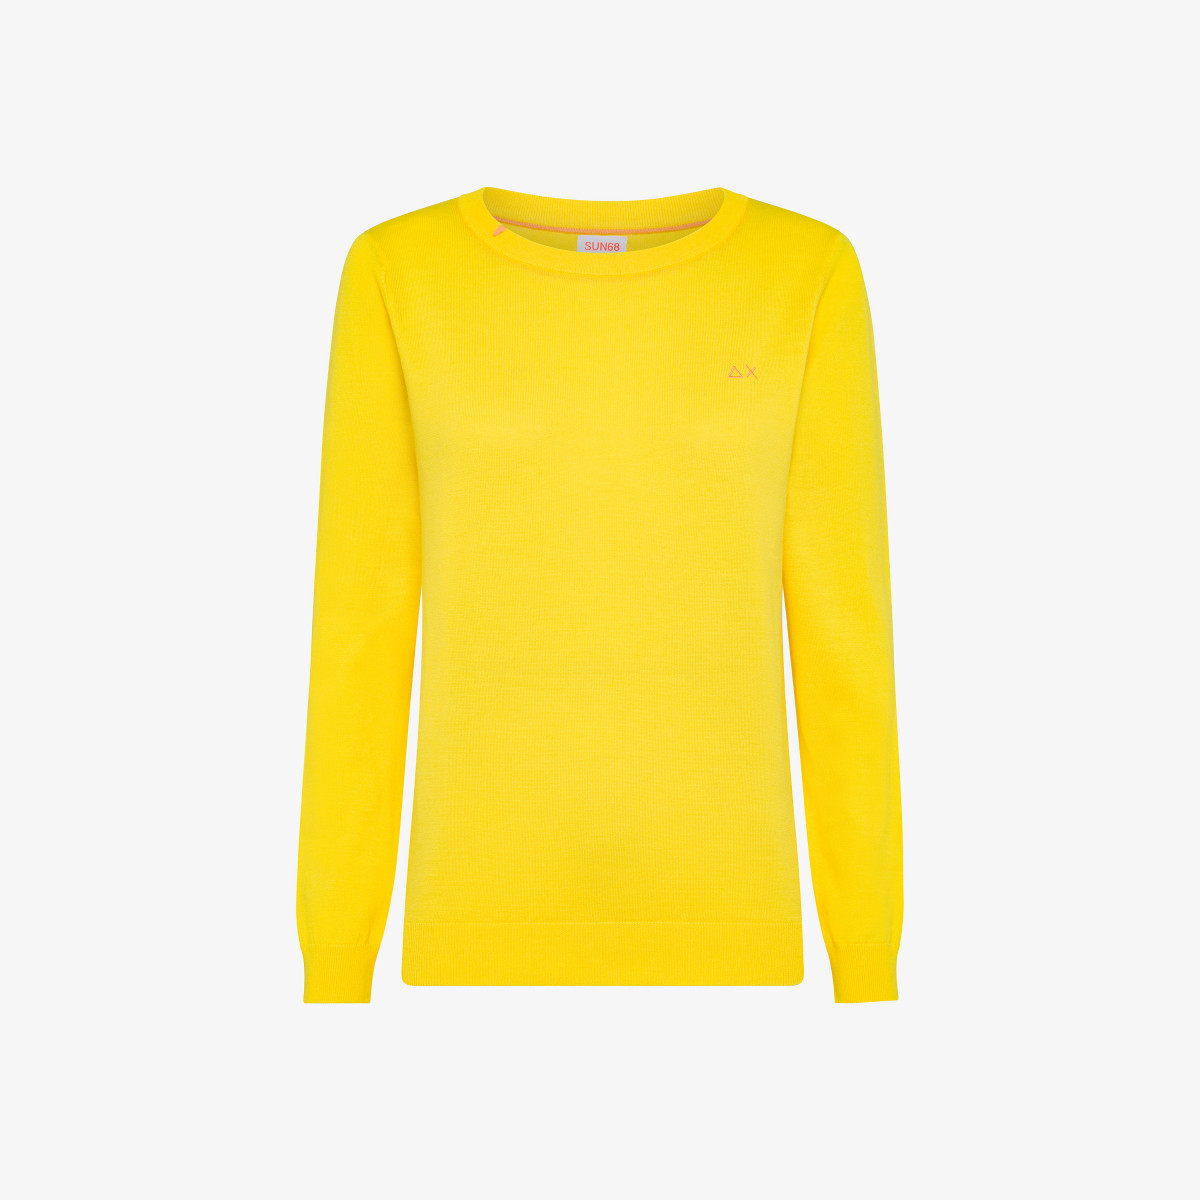 ROUND NECK SOLID L/S YELLOW